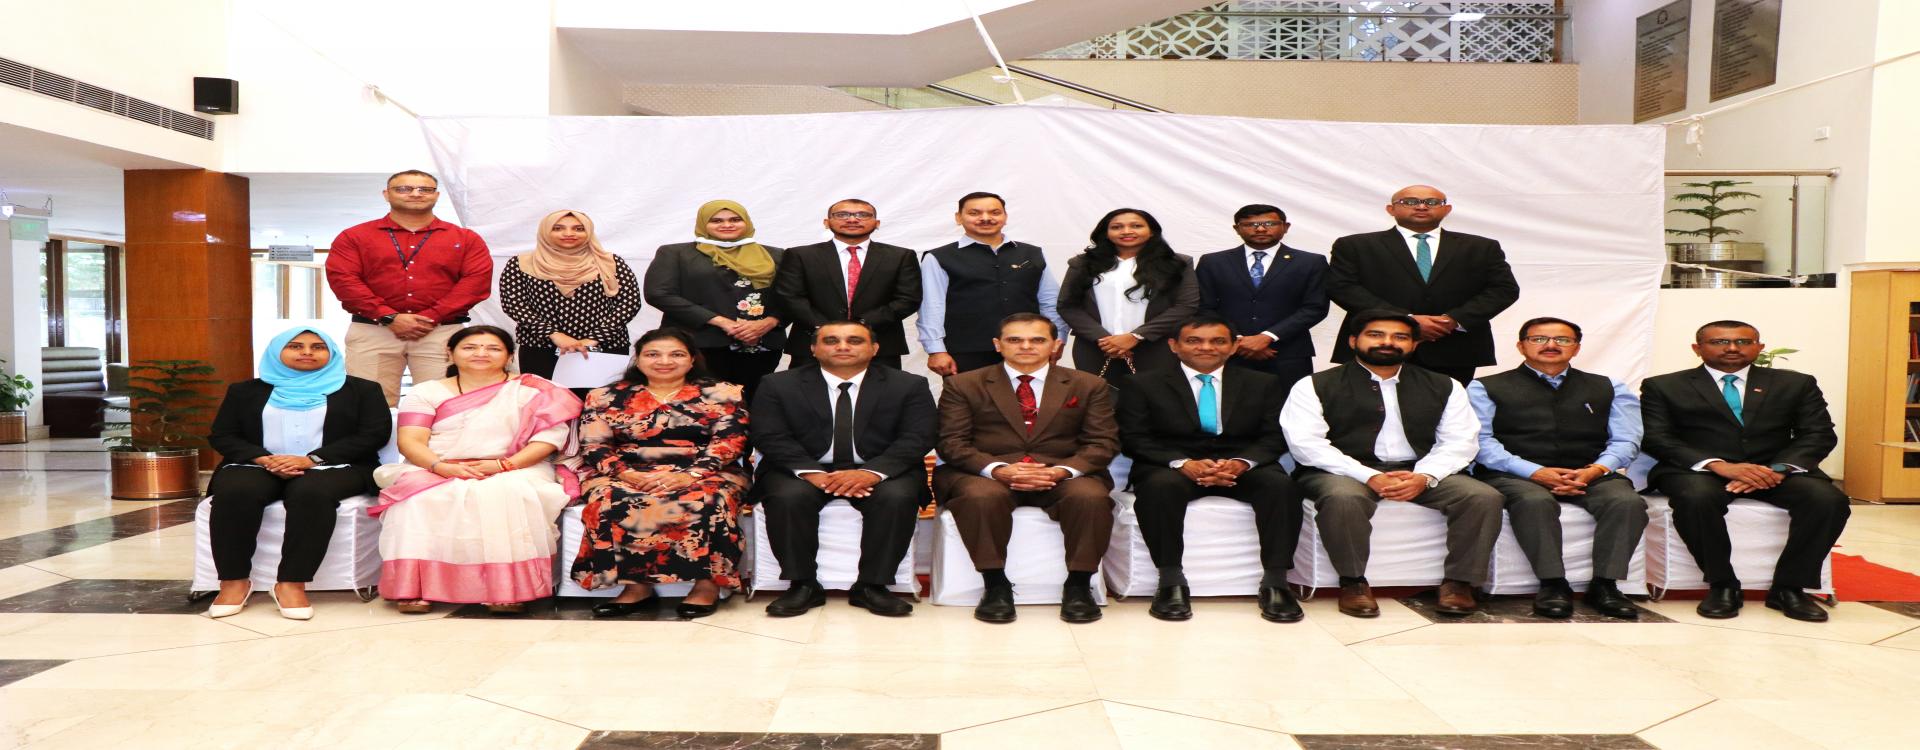 One-Week Study Visit for the High Level Delegation from the Republic of Maldives to India